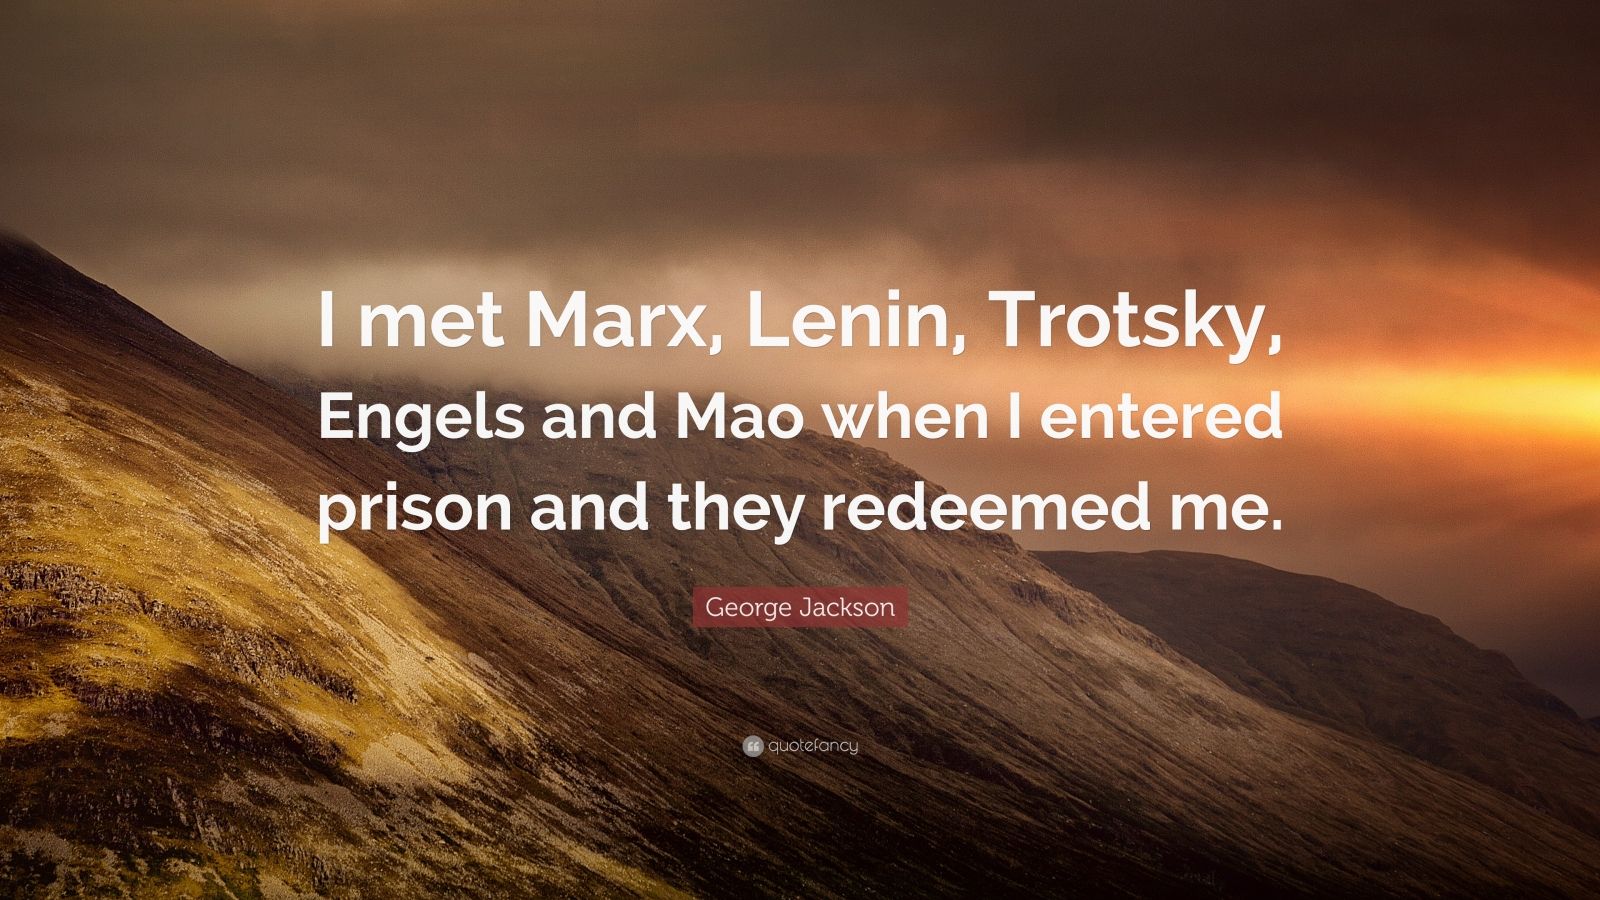 Jackson Quote “I met Marx, Lenin, Trotsky, Engels and Mao when